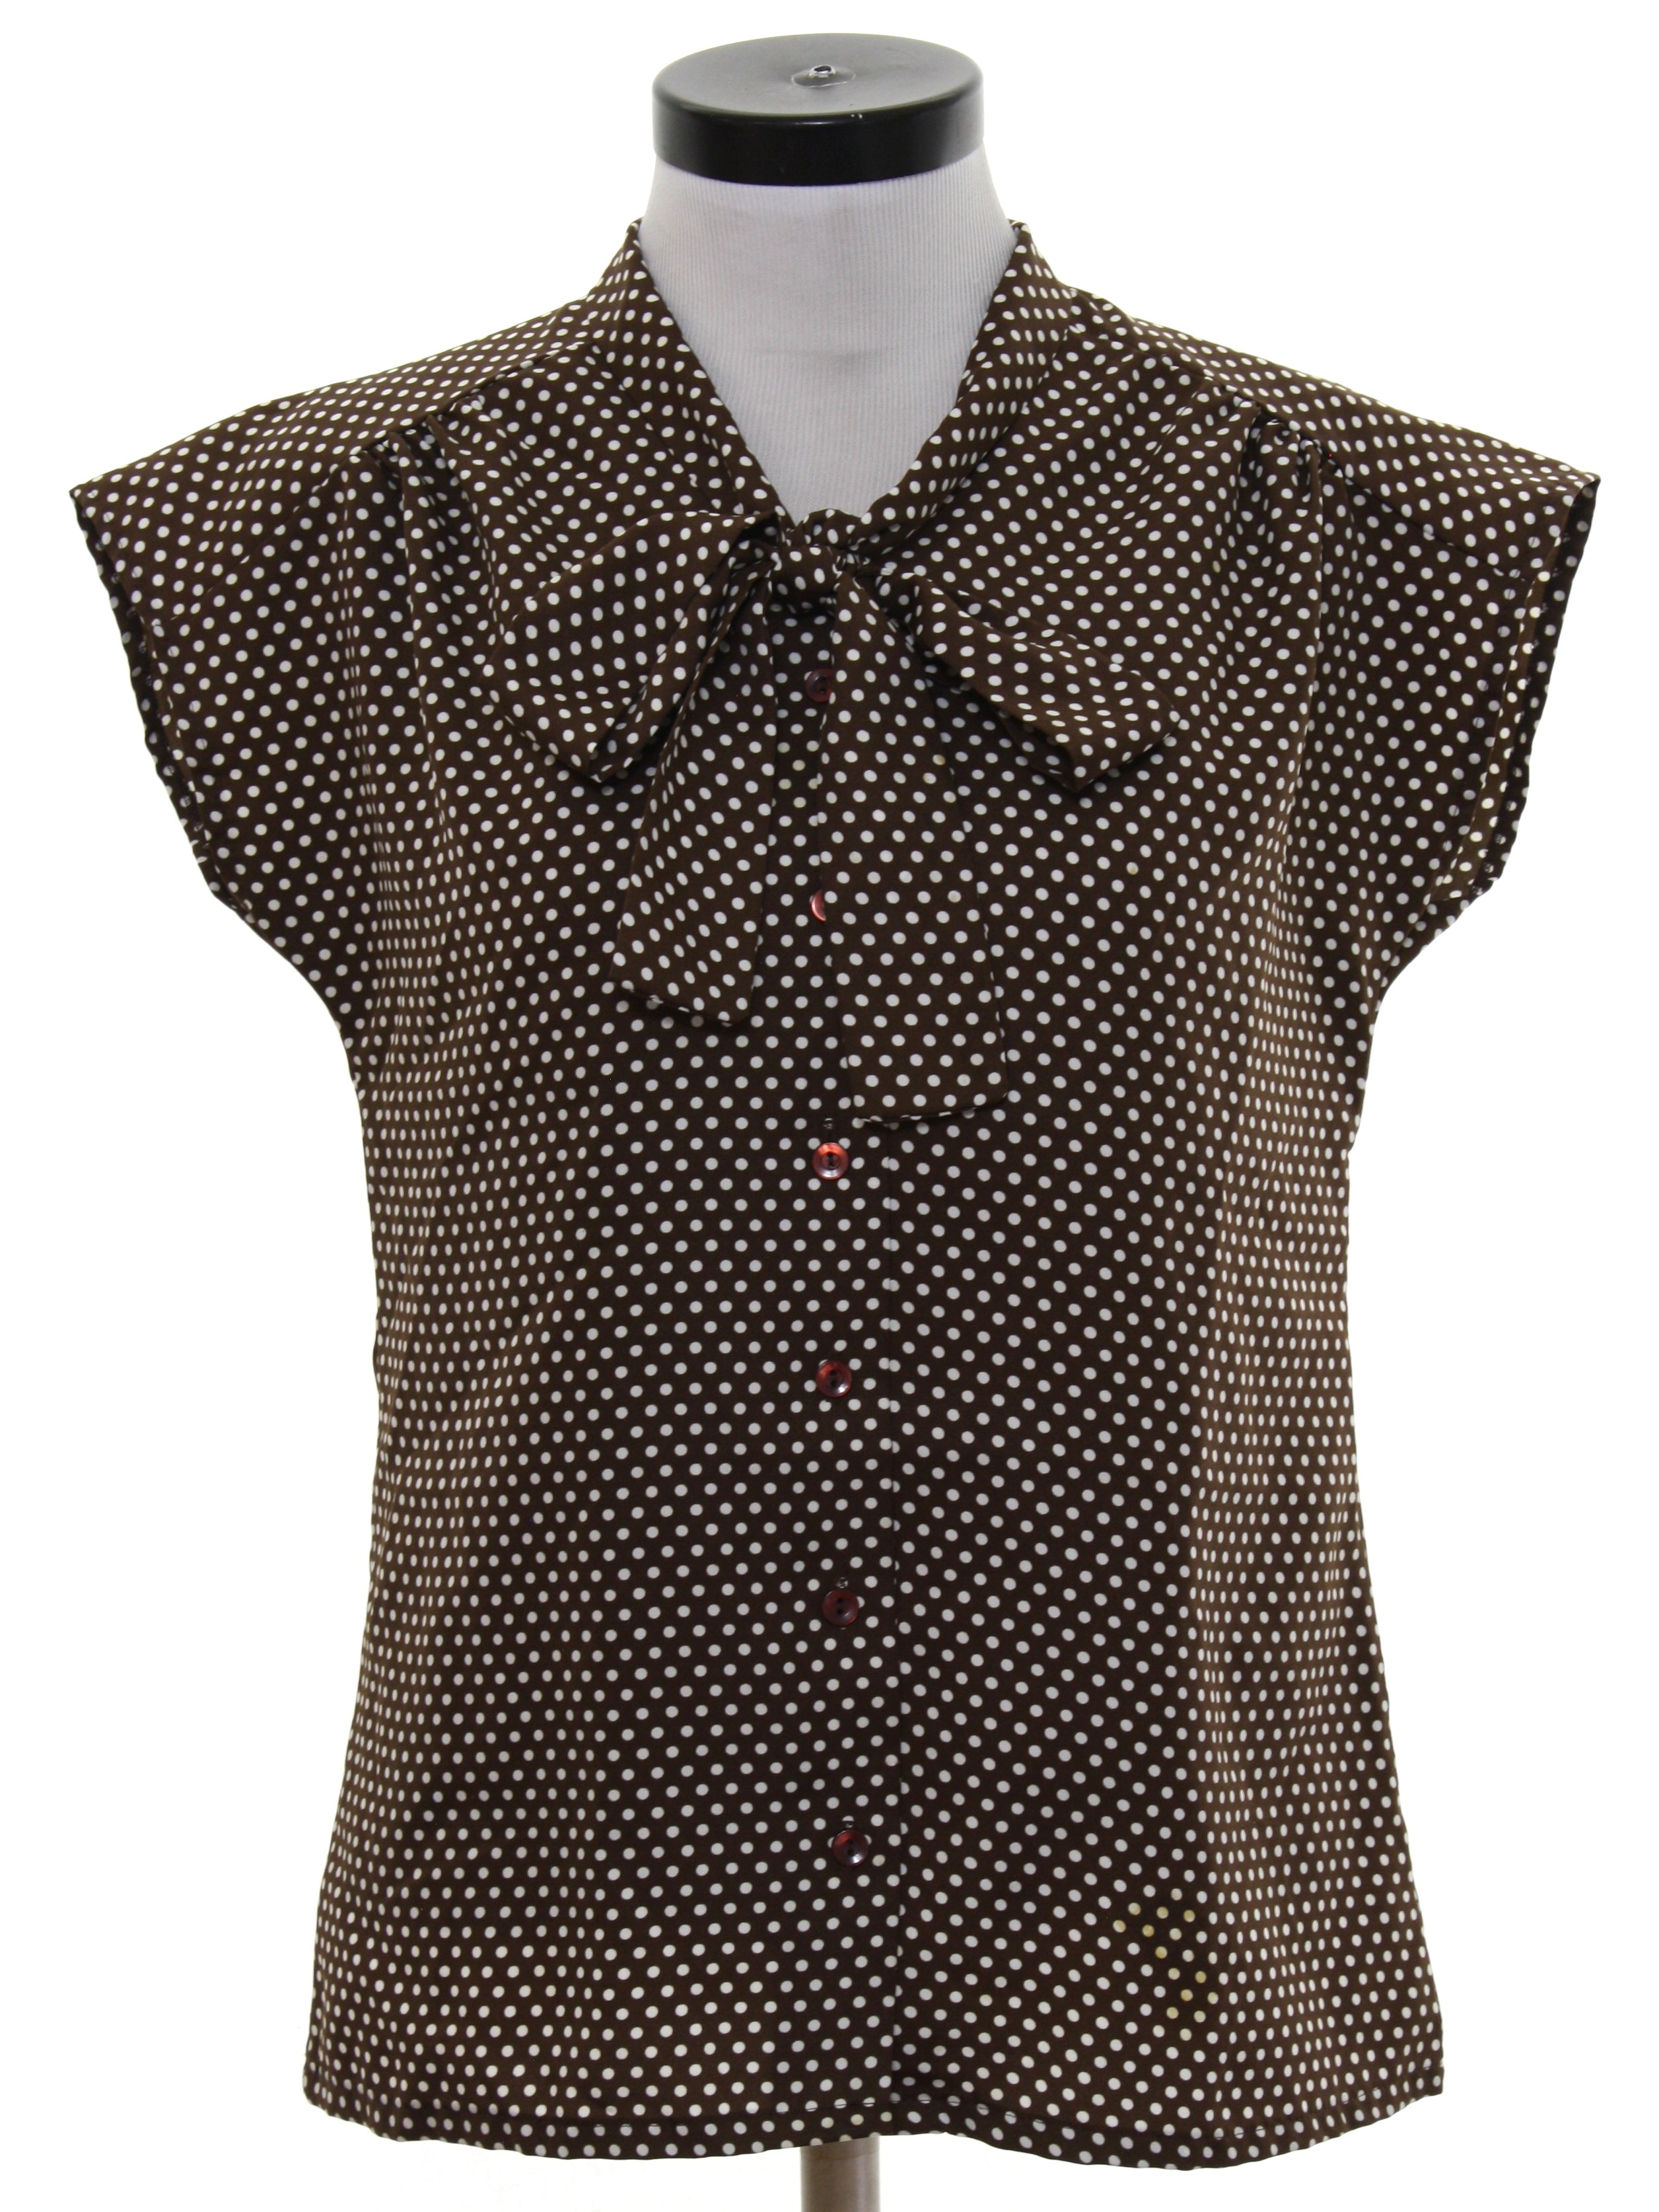 JcPenney 80's Vintage Shirt: 80s -JcPenney- Womens Dark brown ...